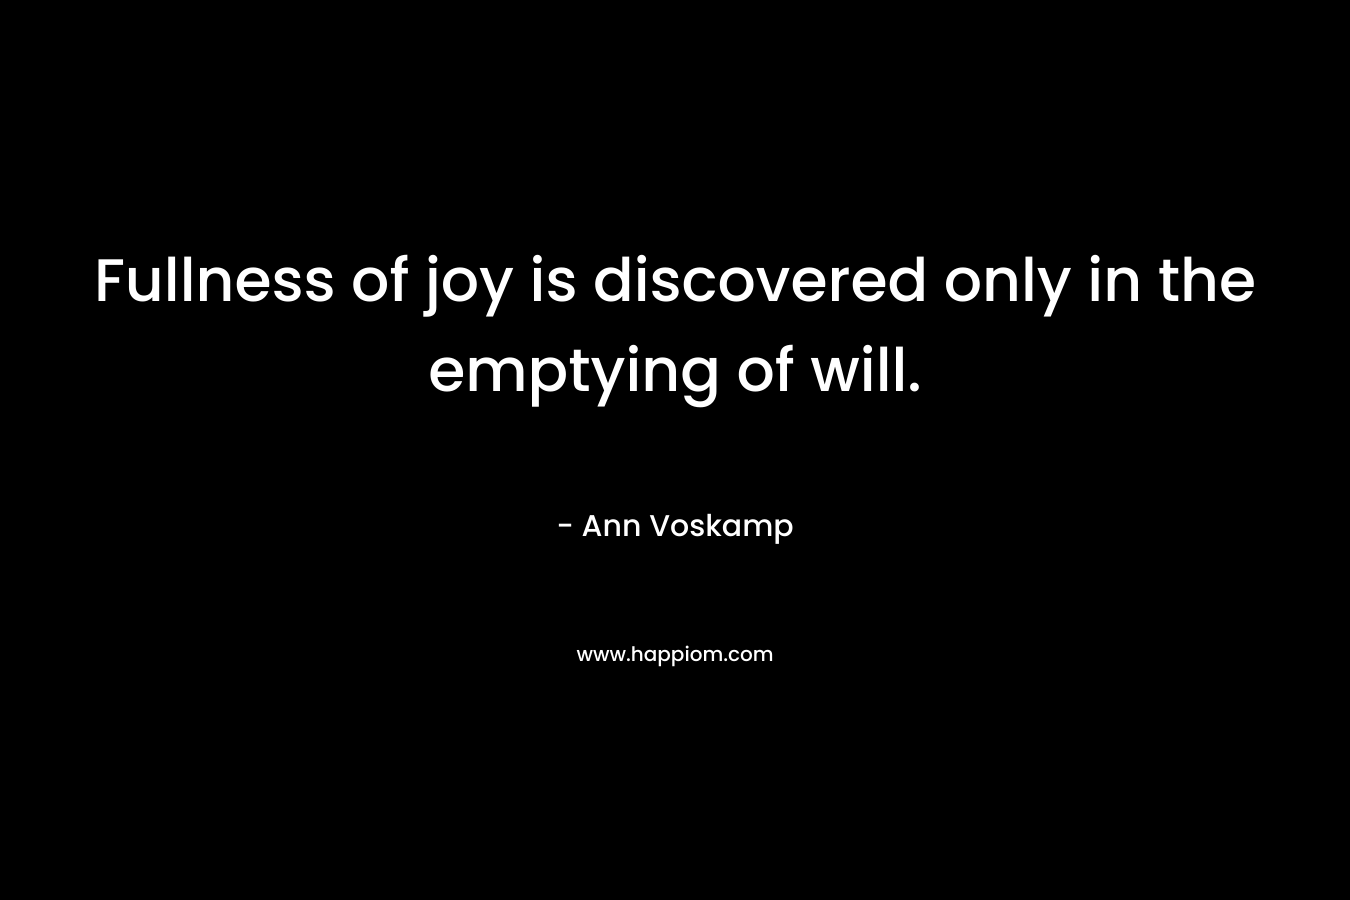 Fullness of joy is discovered only in the emptying of will. – Ann Voskamp